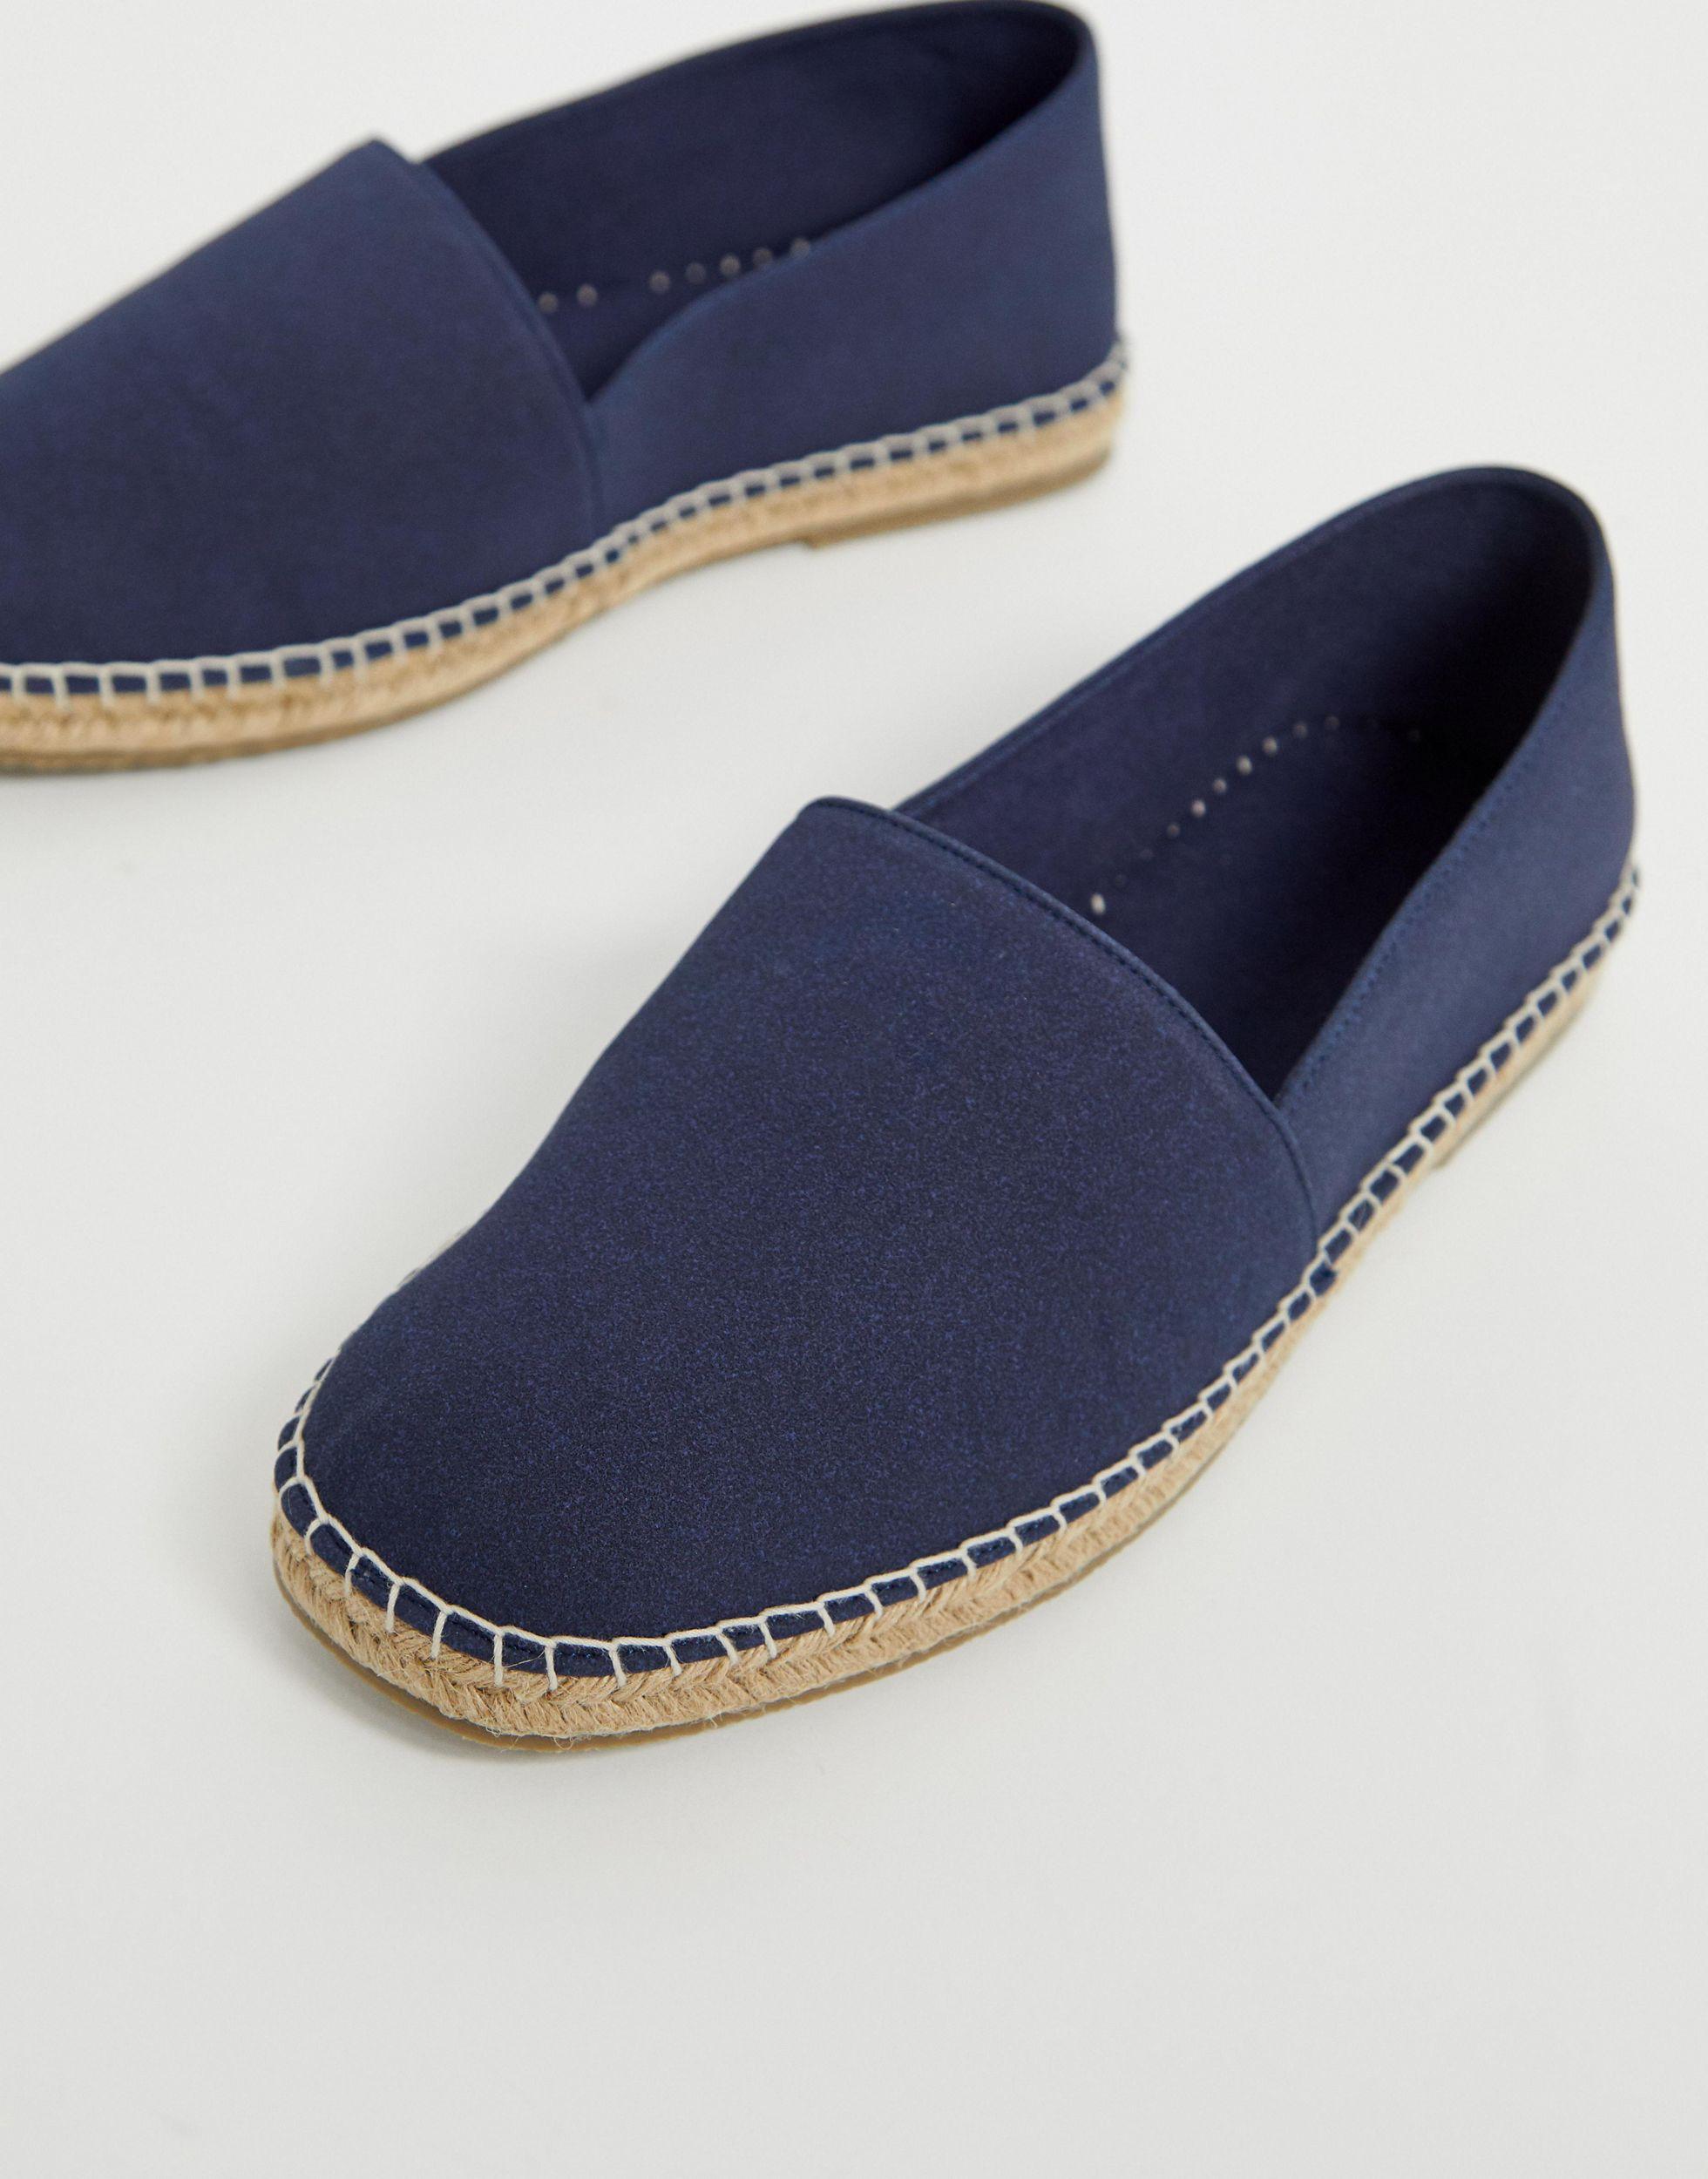 ASOS Canvas Wide Fit Square Toe Espadrilles in Navy (Blue) for Men - Lyst